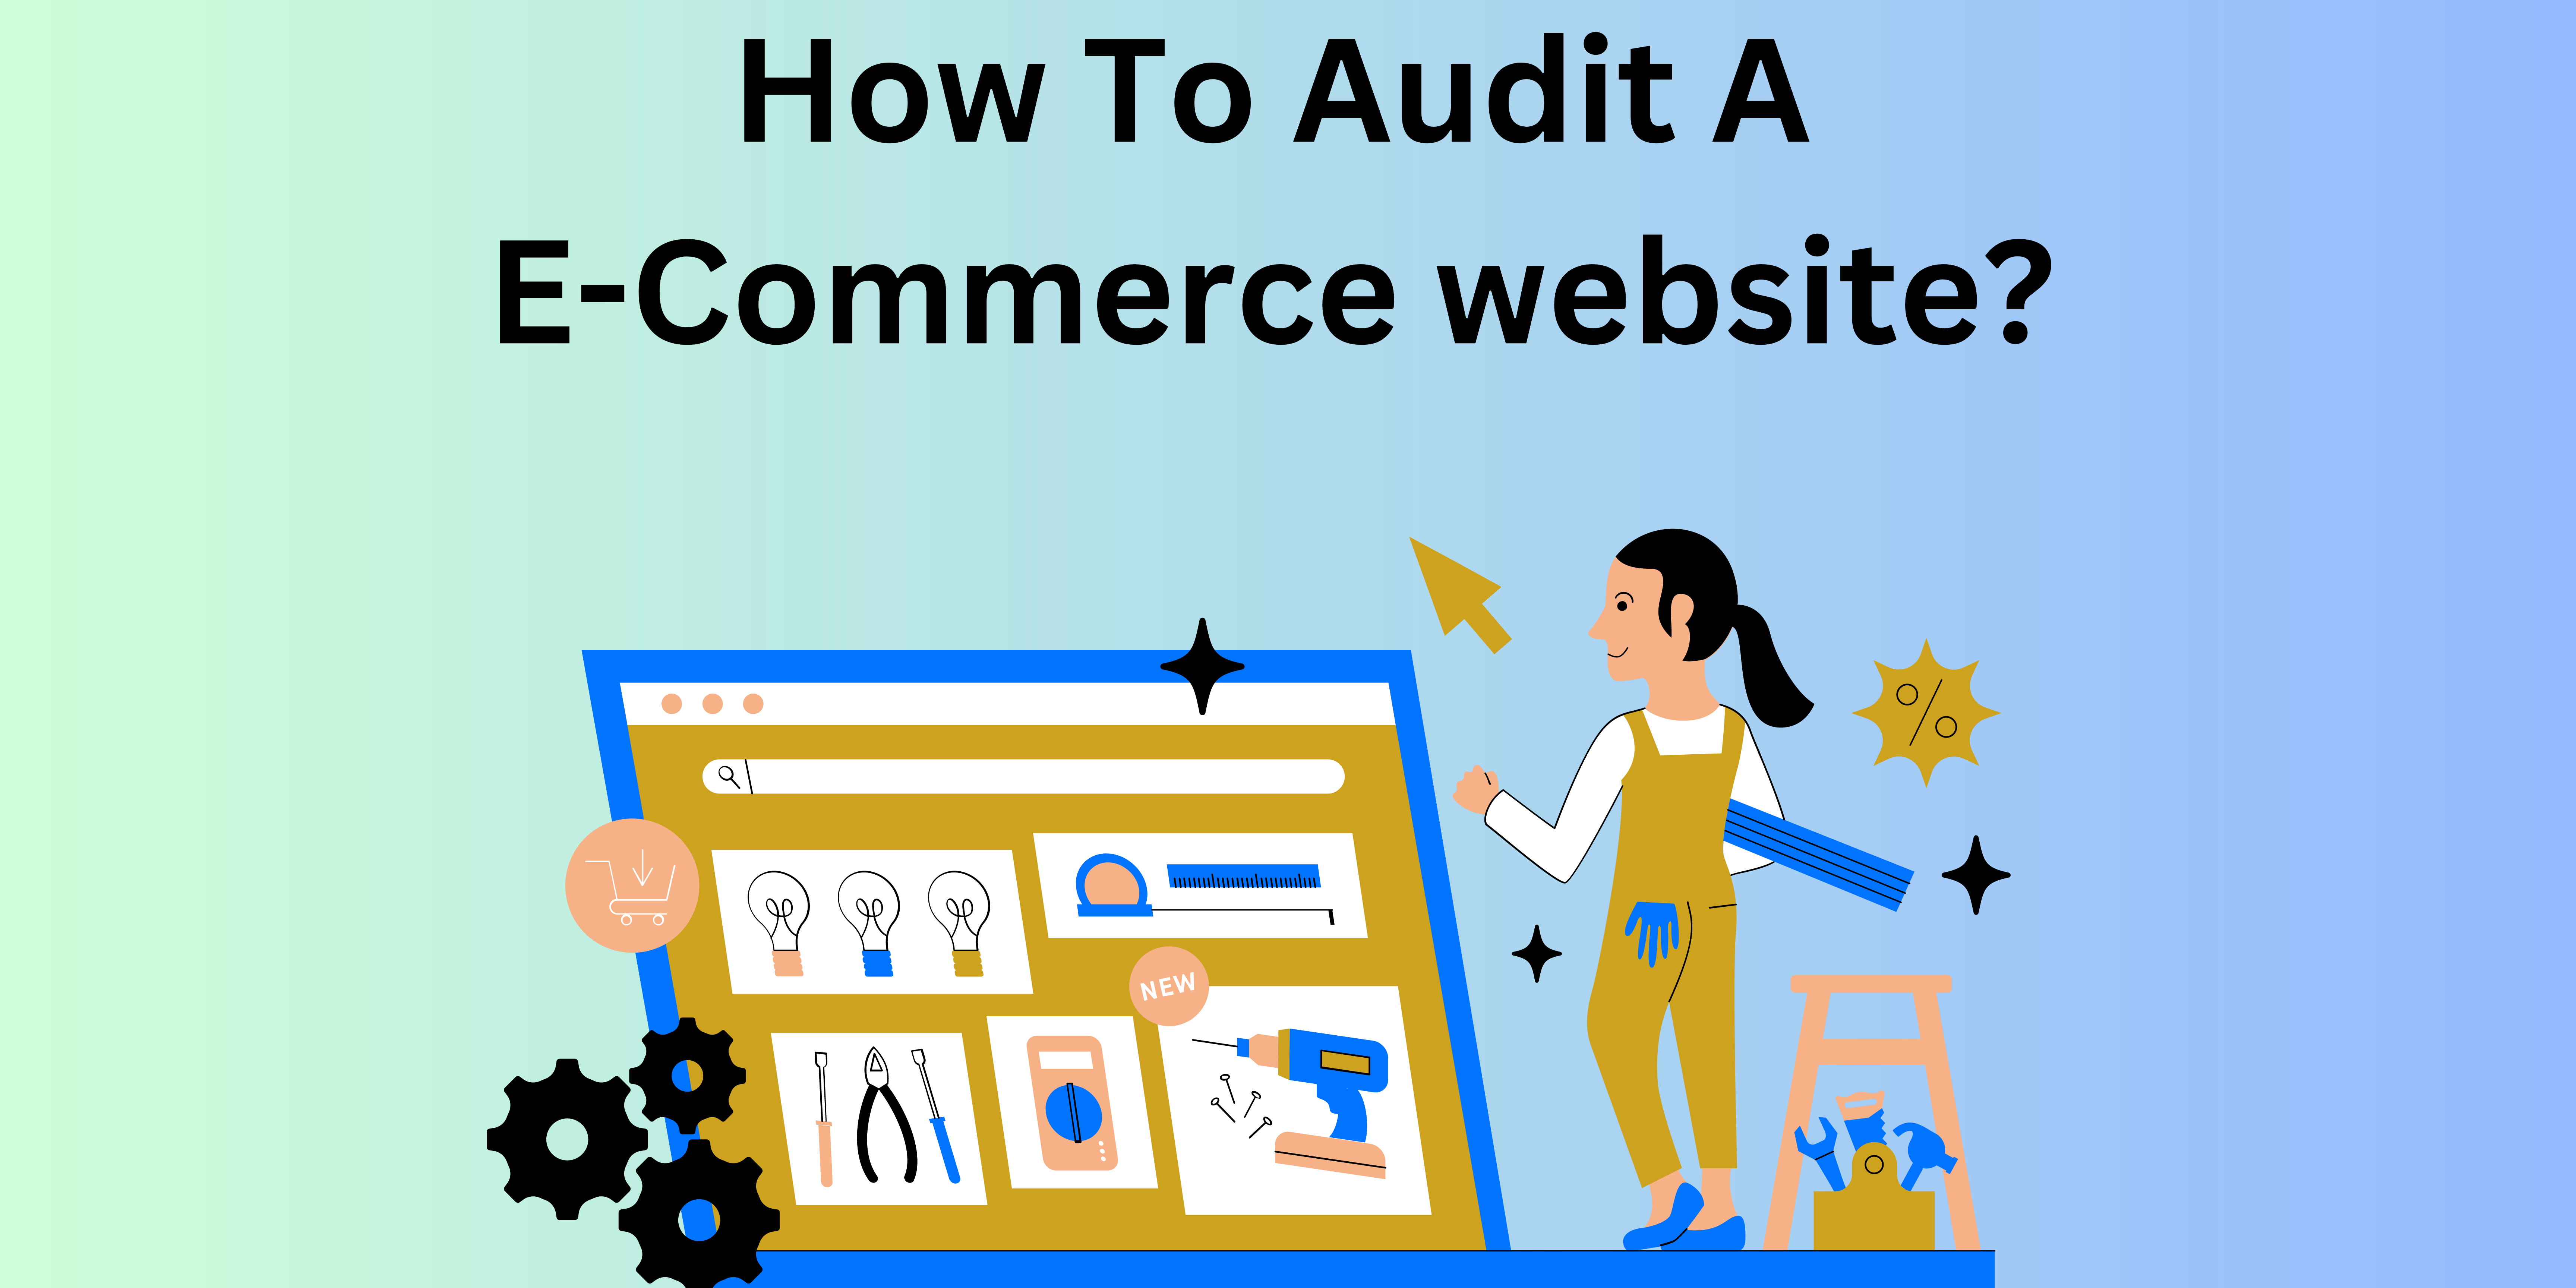 How To Audit A E-Commerce website